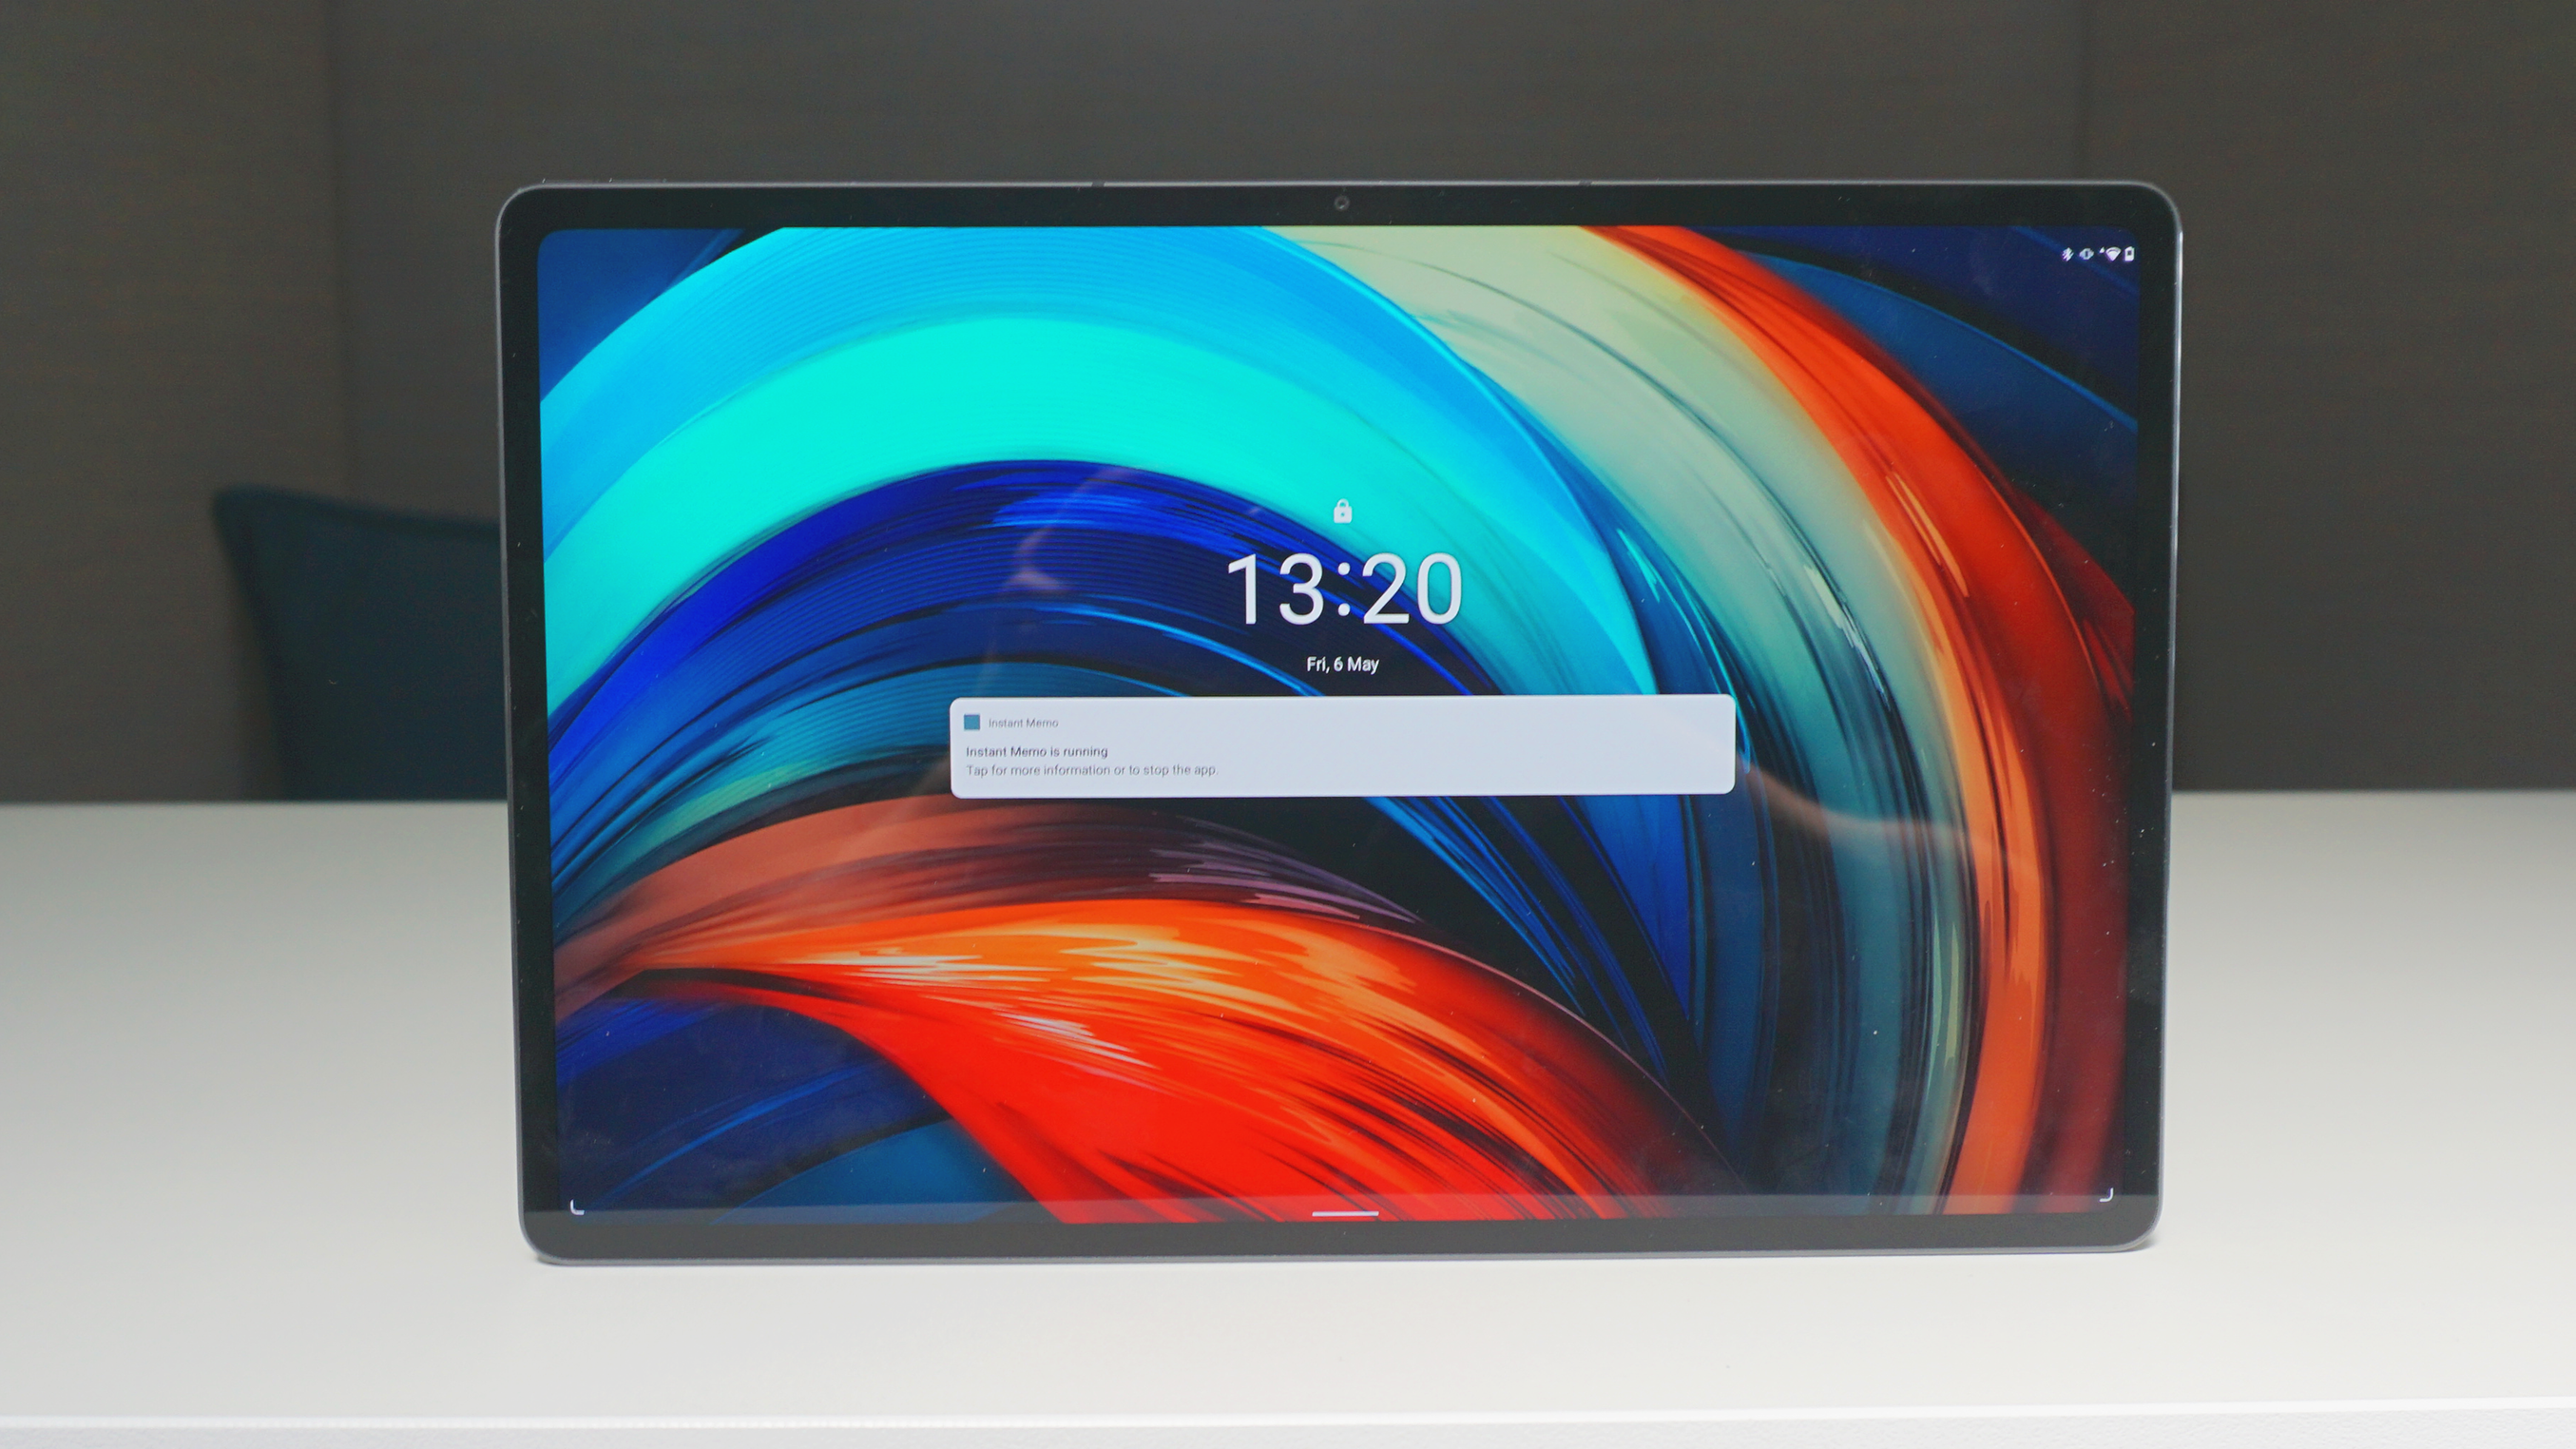 Lenovo Tab P12 (TB370FU) review - great build quality and 3K